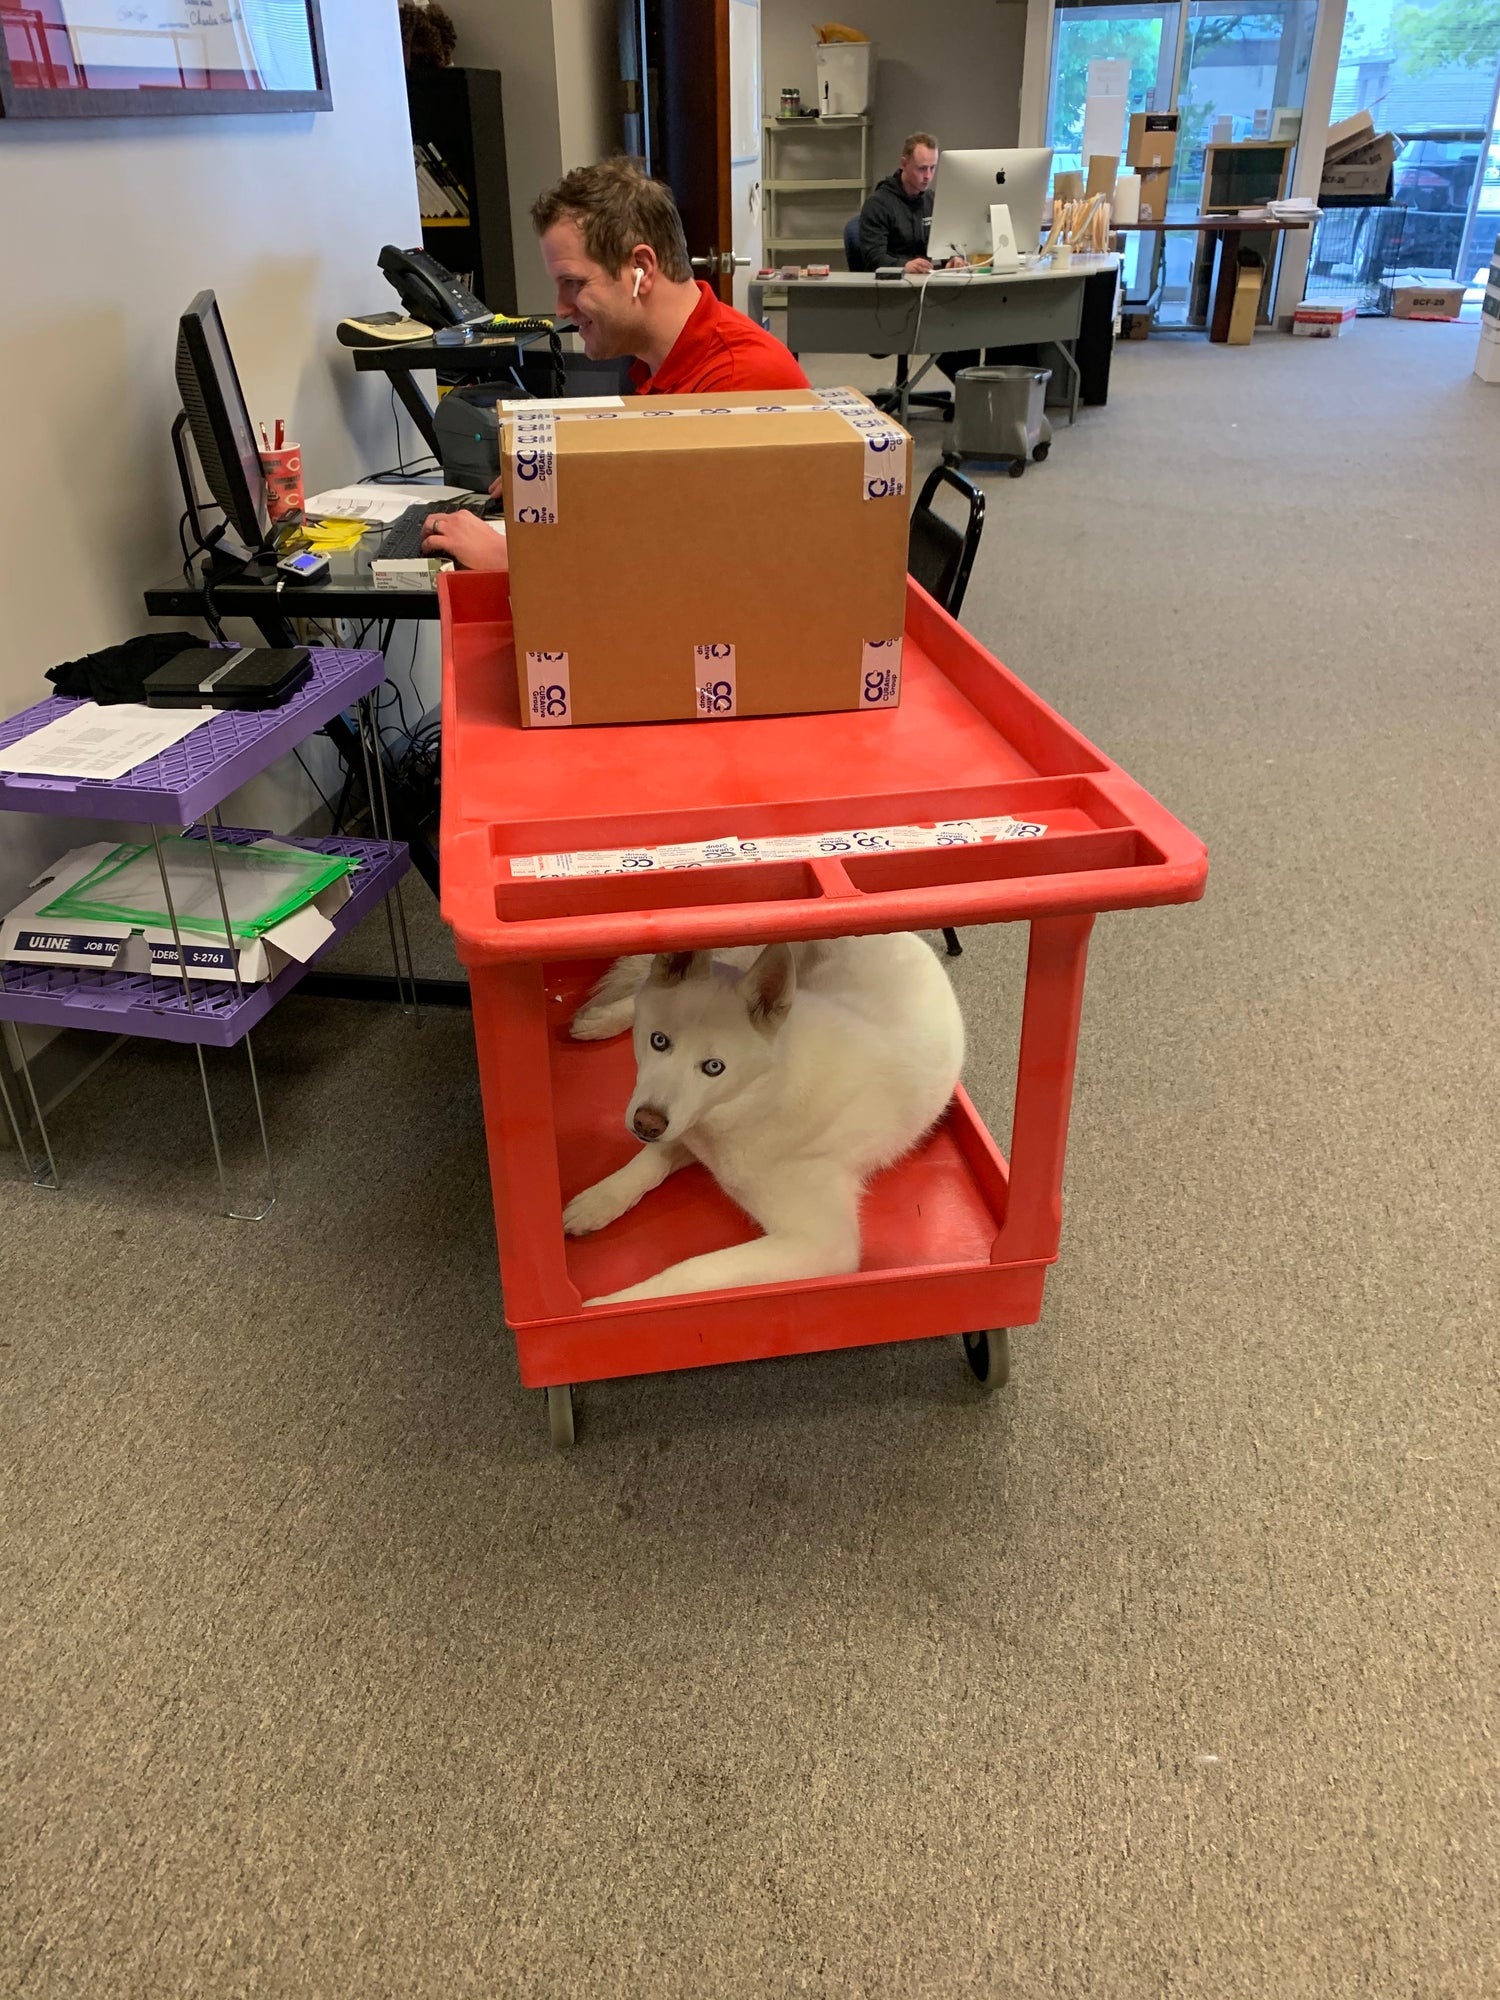 Curatives' Hopsin the Husky Dog laying down on the job, while co-founder Nick is hard at work.